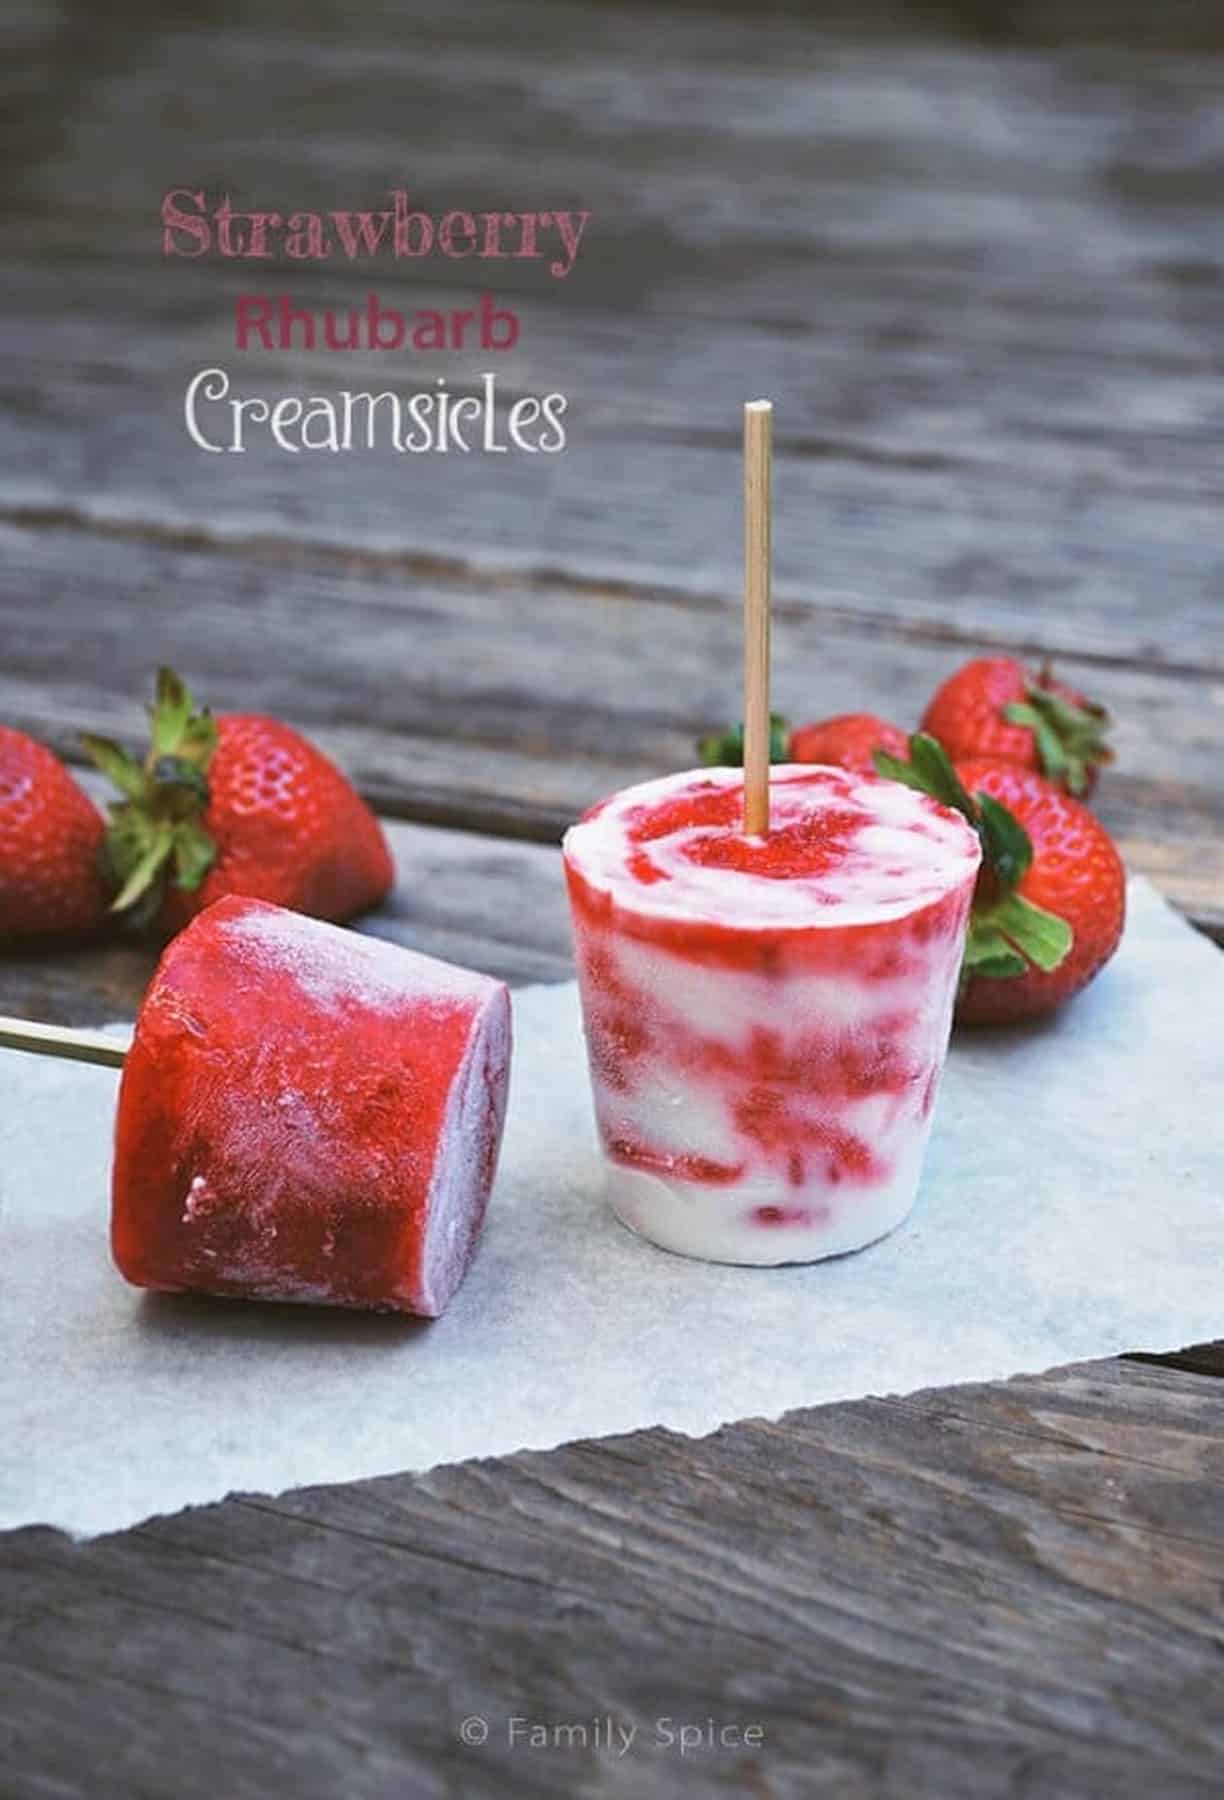 Strawberry Rhubarb Creamsicles on parchment with fresh strawberries.